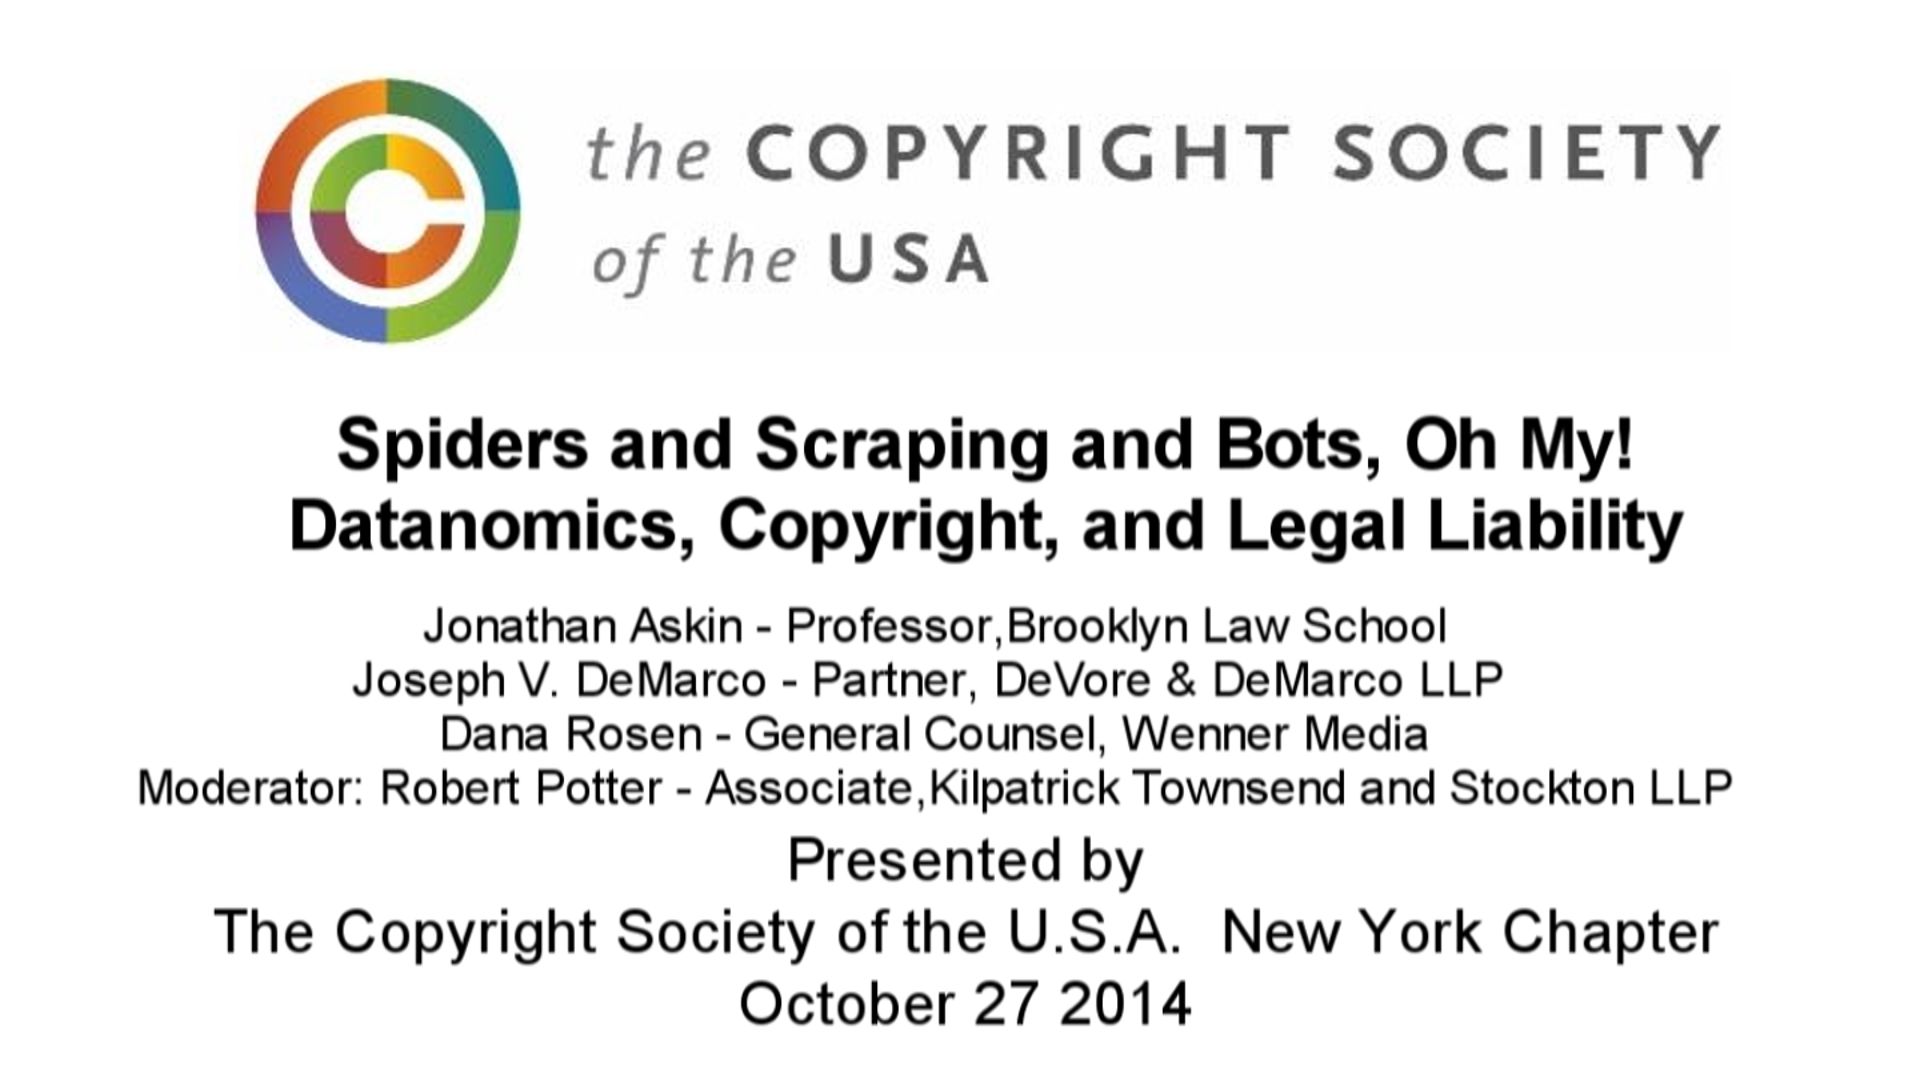 CSUSA - Spiders and Scraping and Bots, Oh My! -- Datanomics, Copyright, and Legal Liability -  October 27 2014